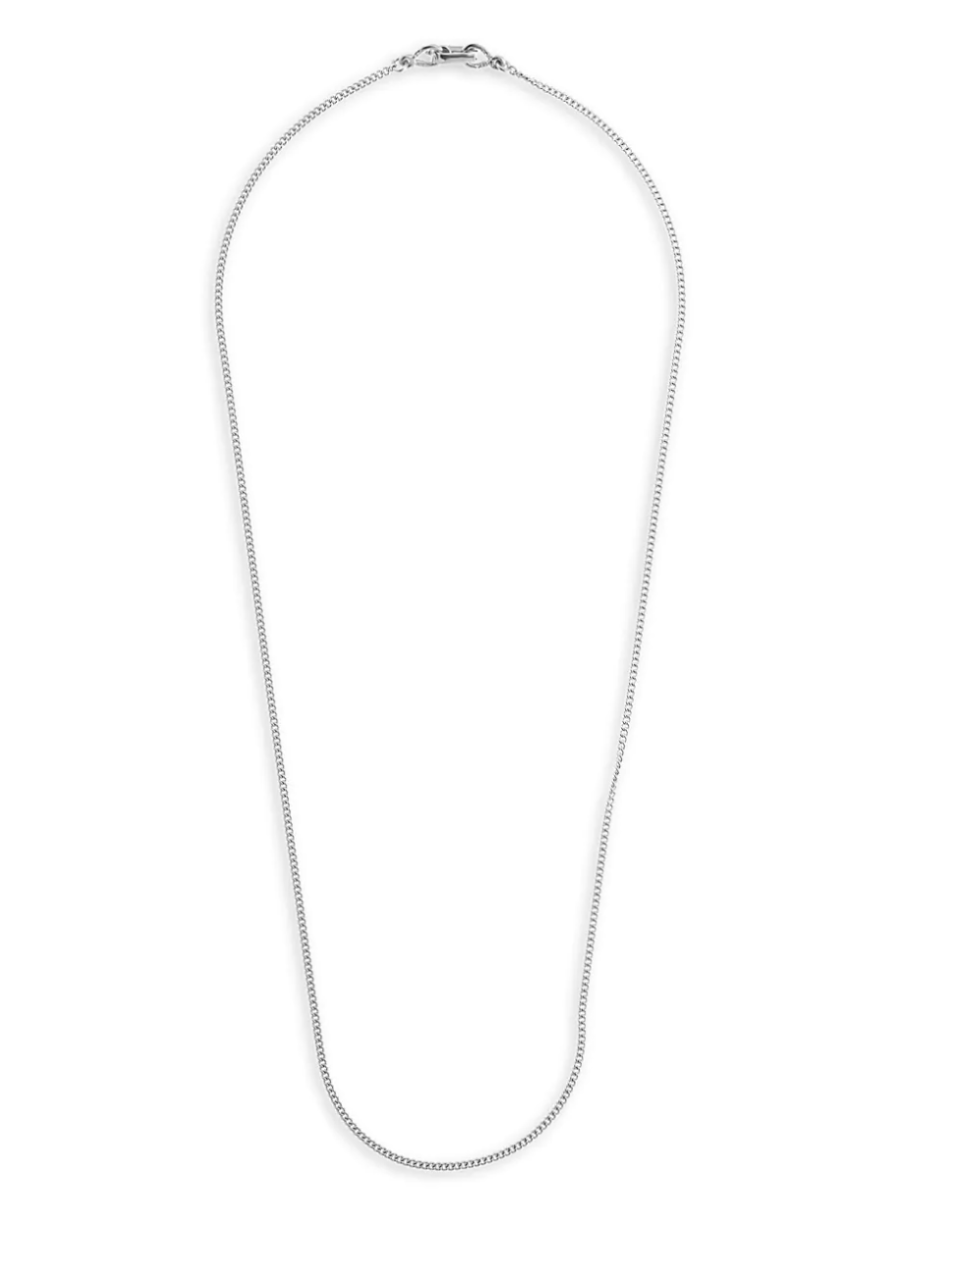 Fabiana Sterling Silver Chain Necklace/19.6"